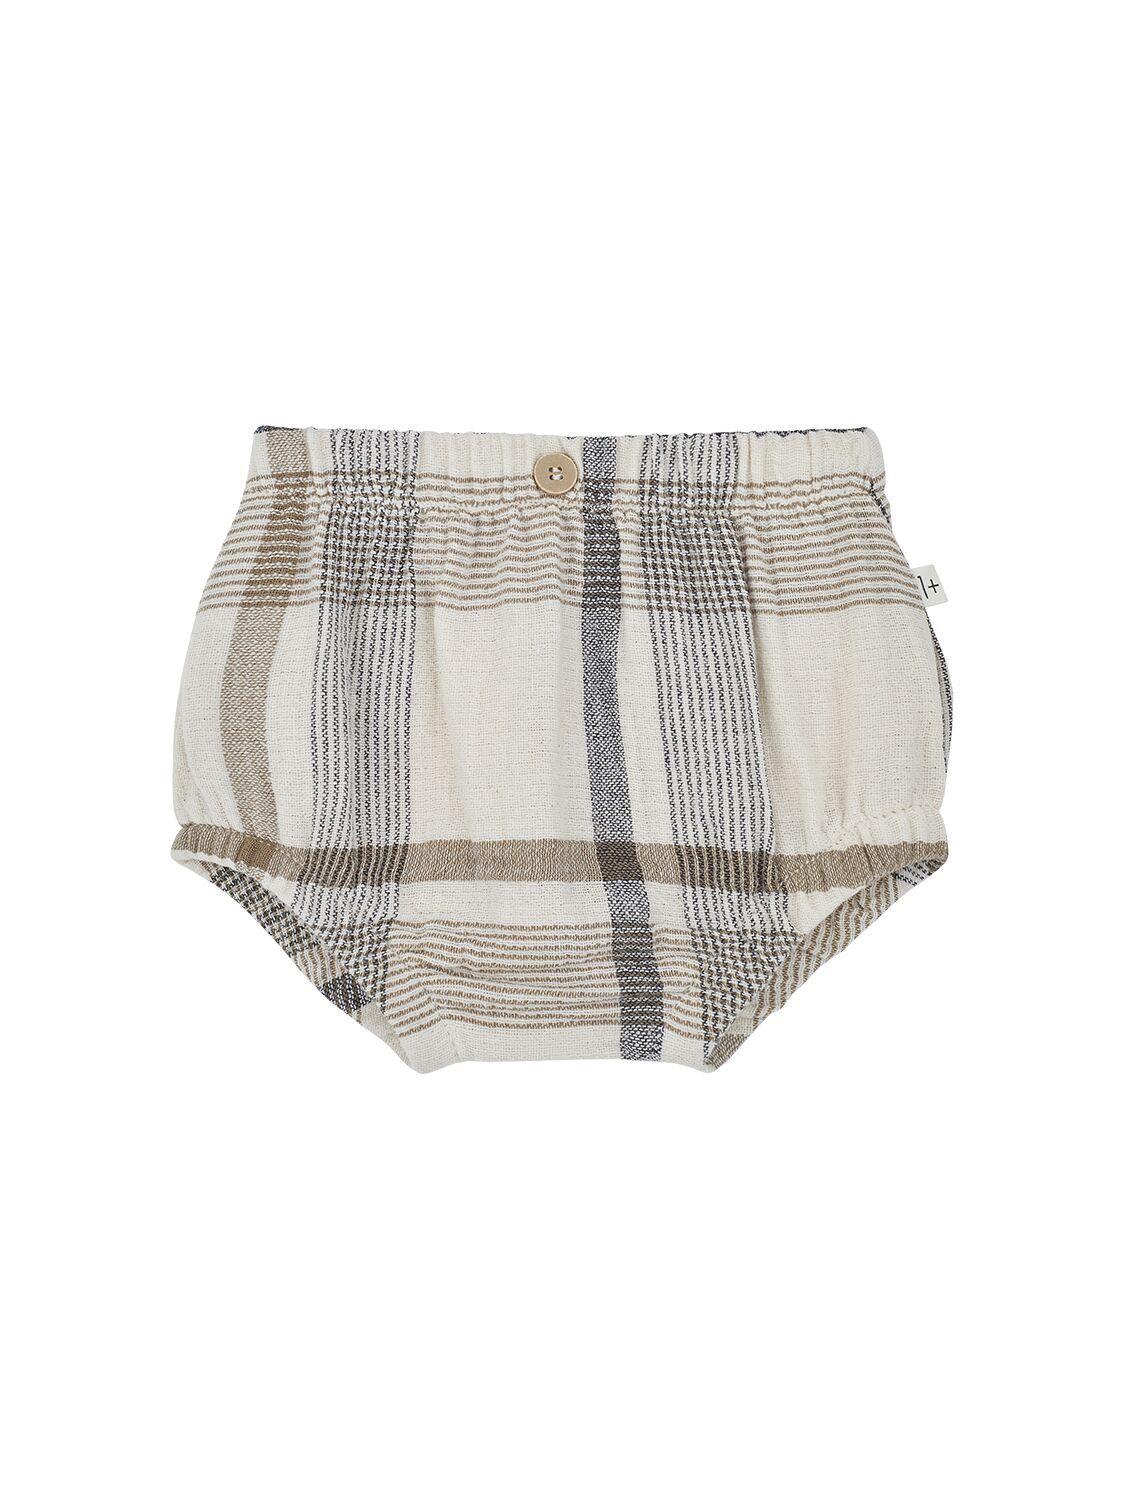 Image of Cotton Madras Bloomers